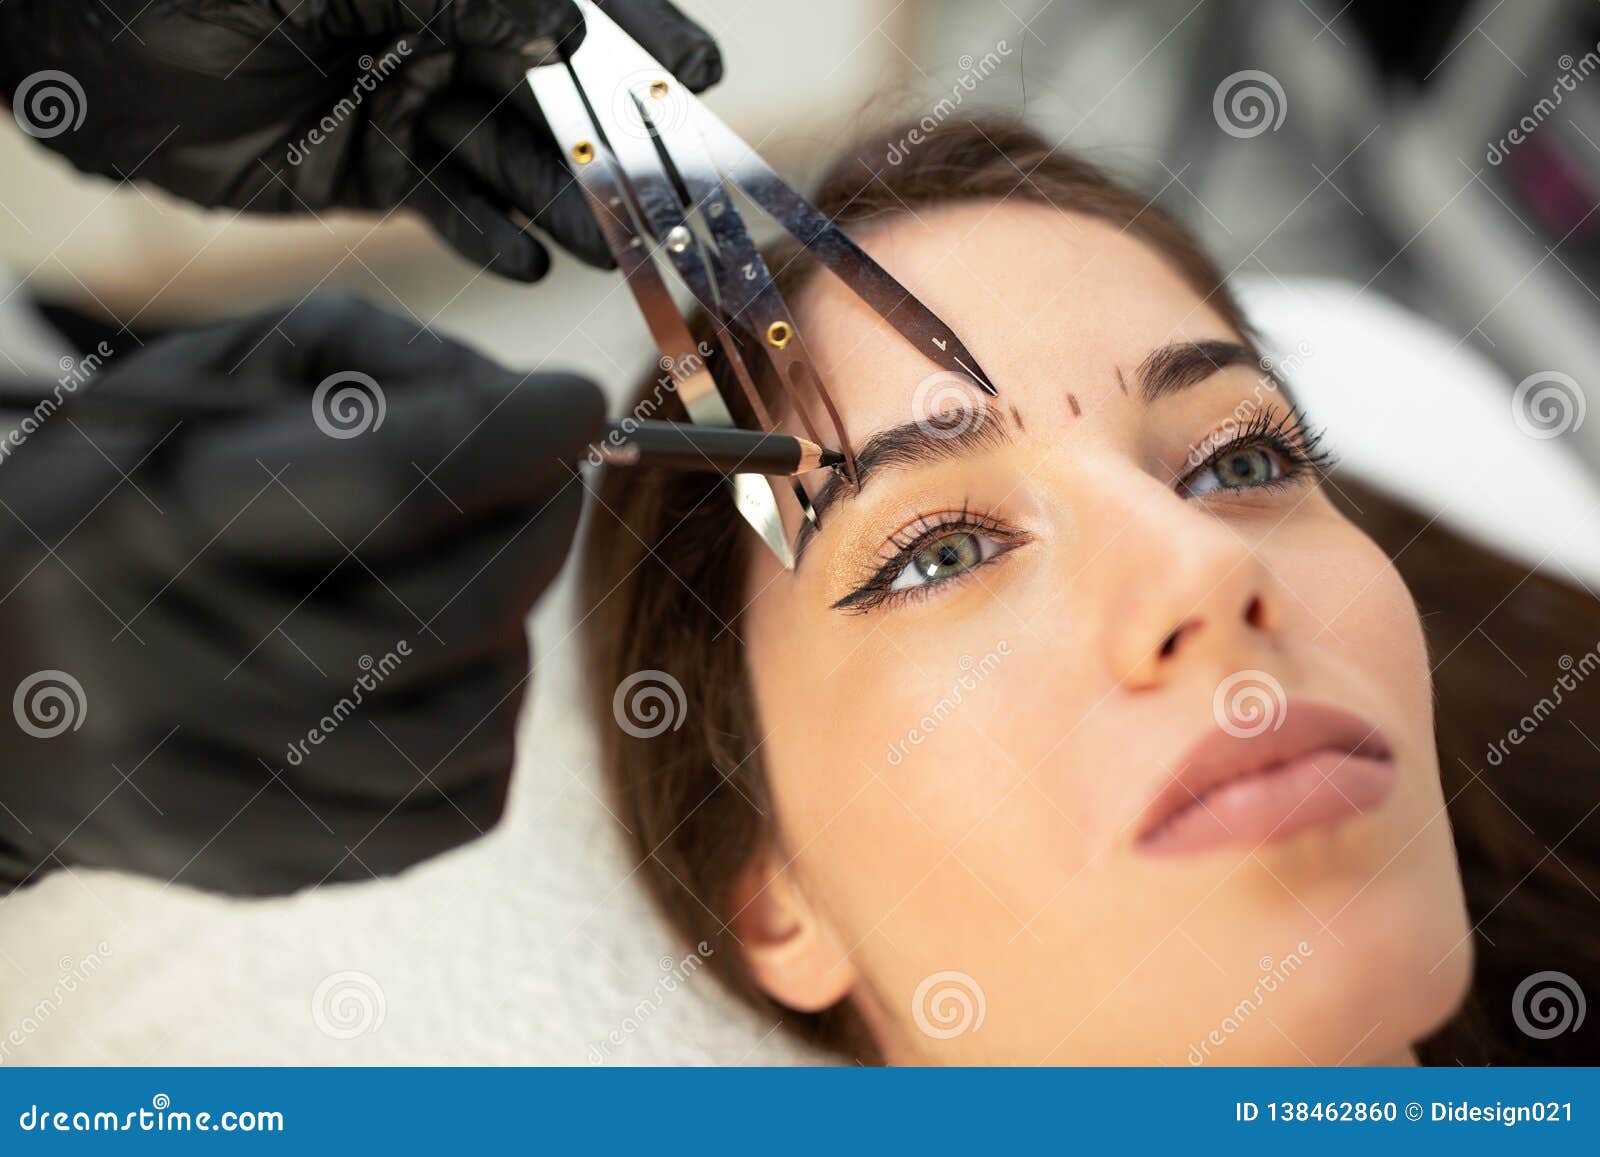 using cosmetics tools for taking the correct measure of future eyebrows